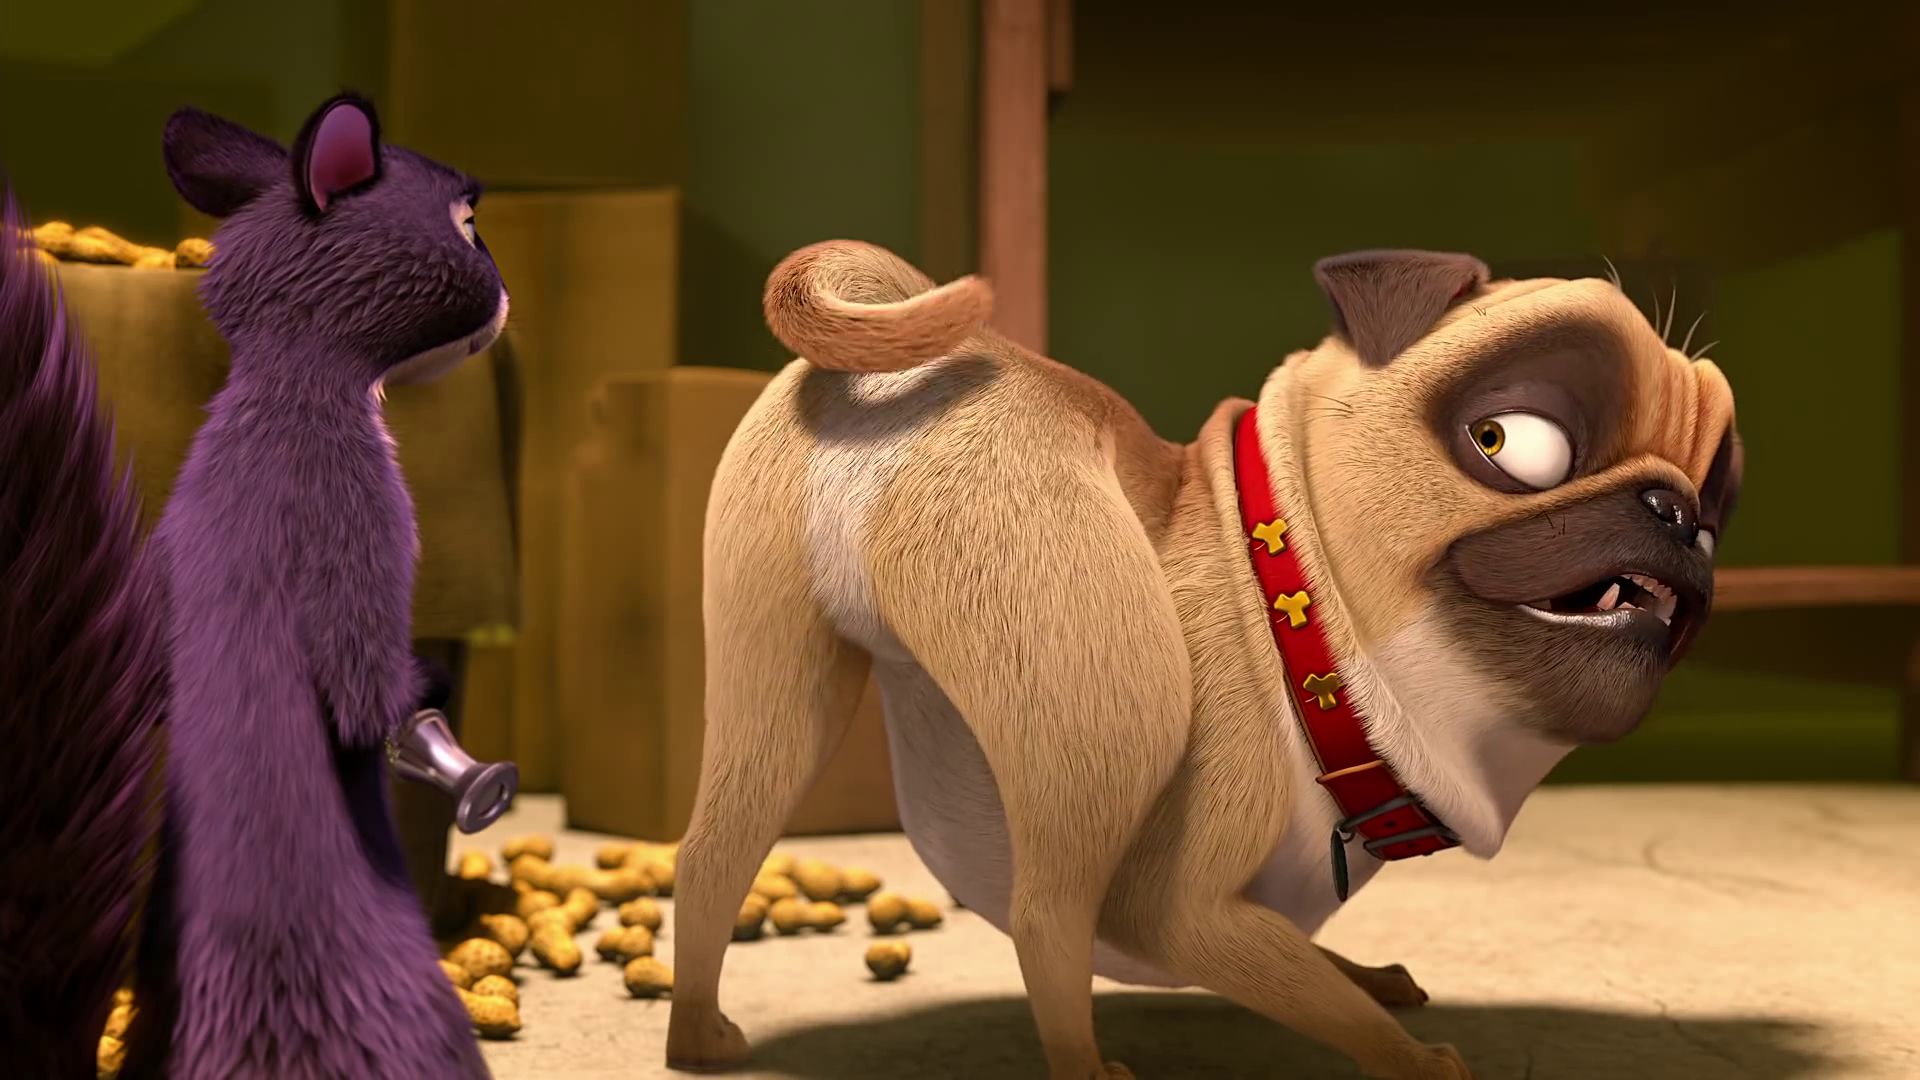 Princess the Pug voiced by Maya Rudolph in "The Nut Job"